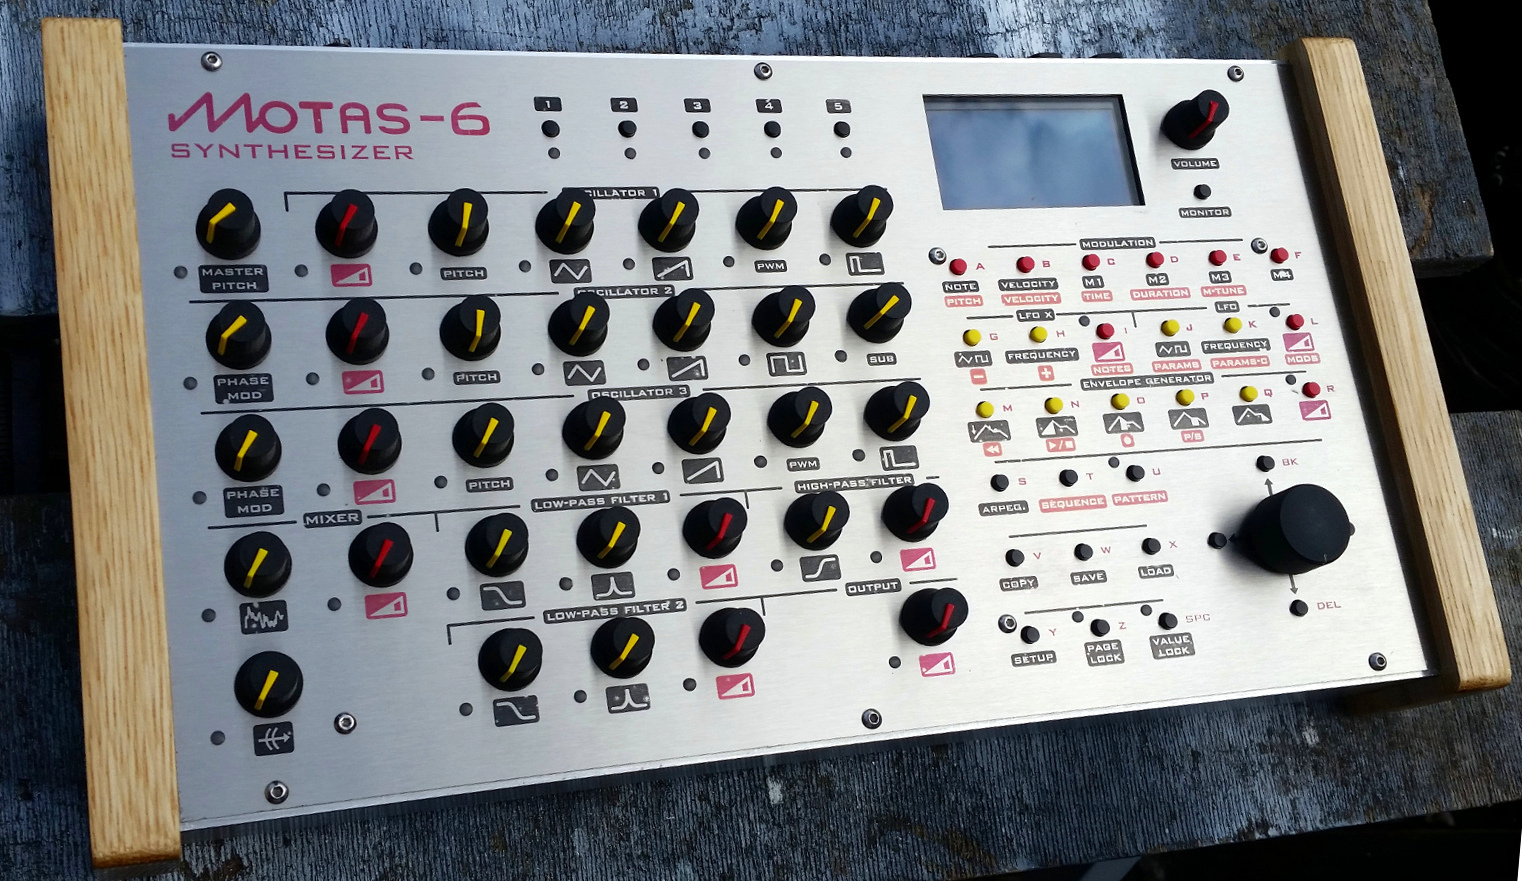 Motas-6 analogue synthesizer production unit in stainless steel finish